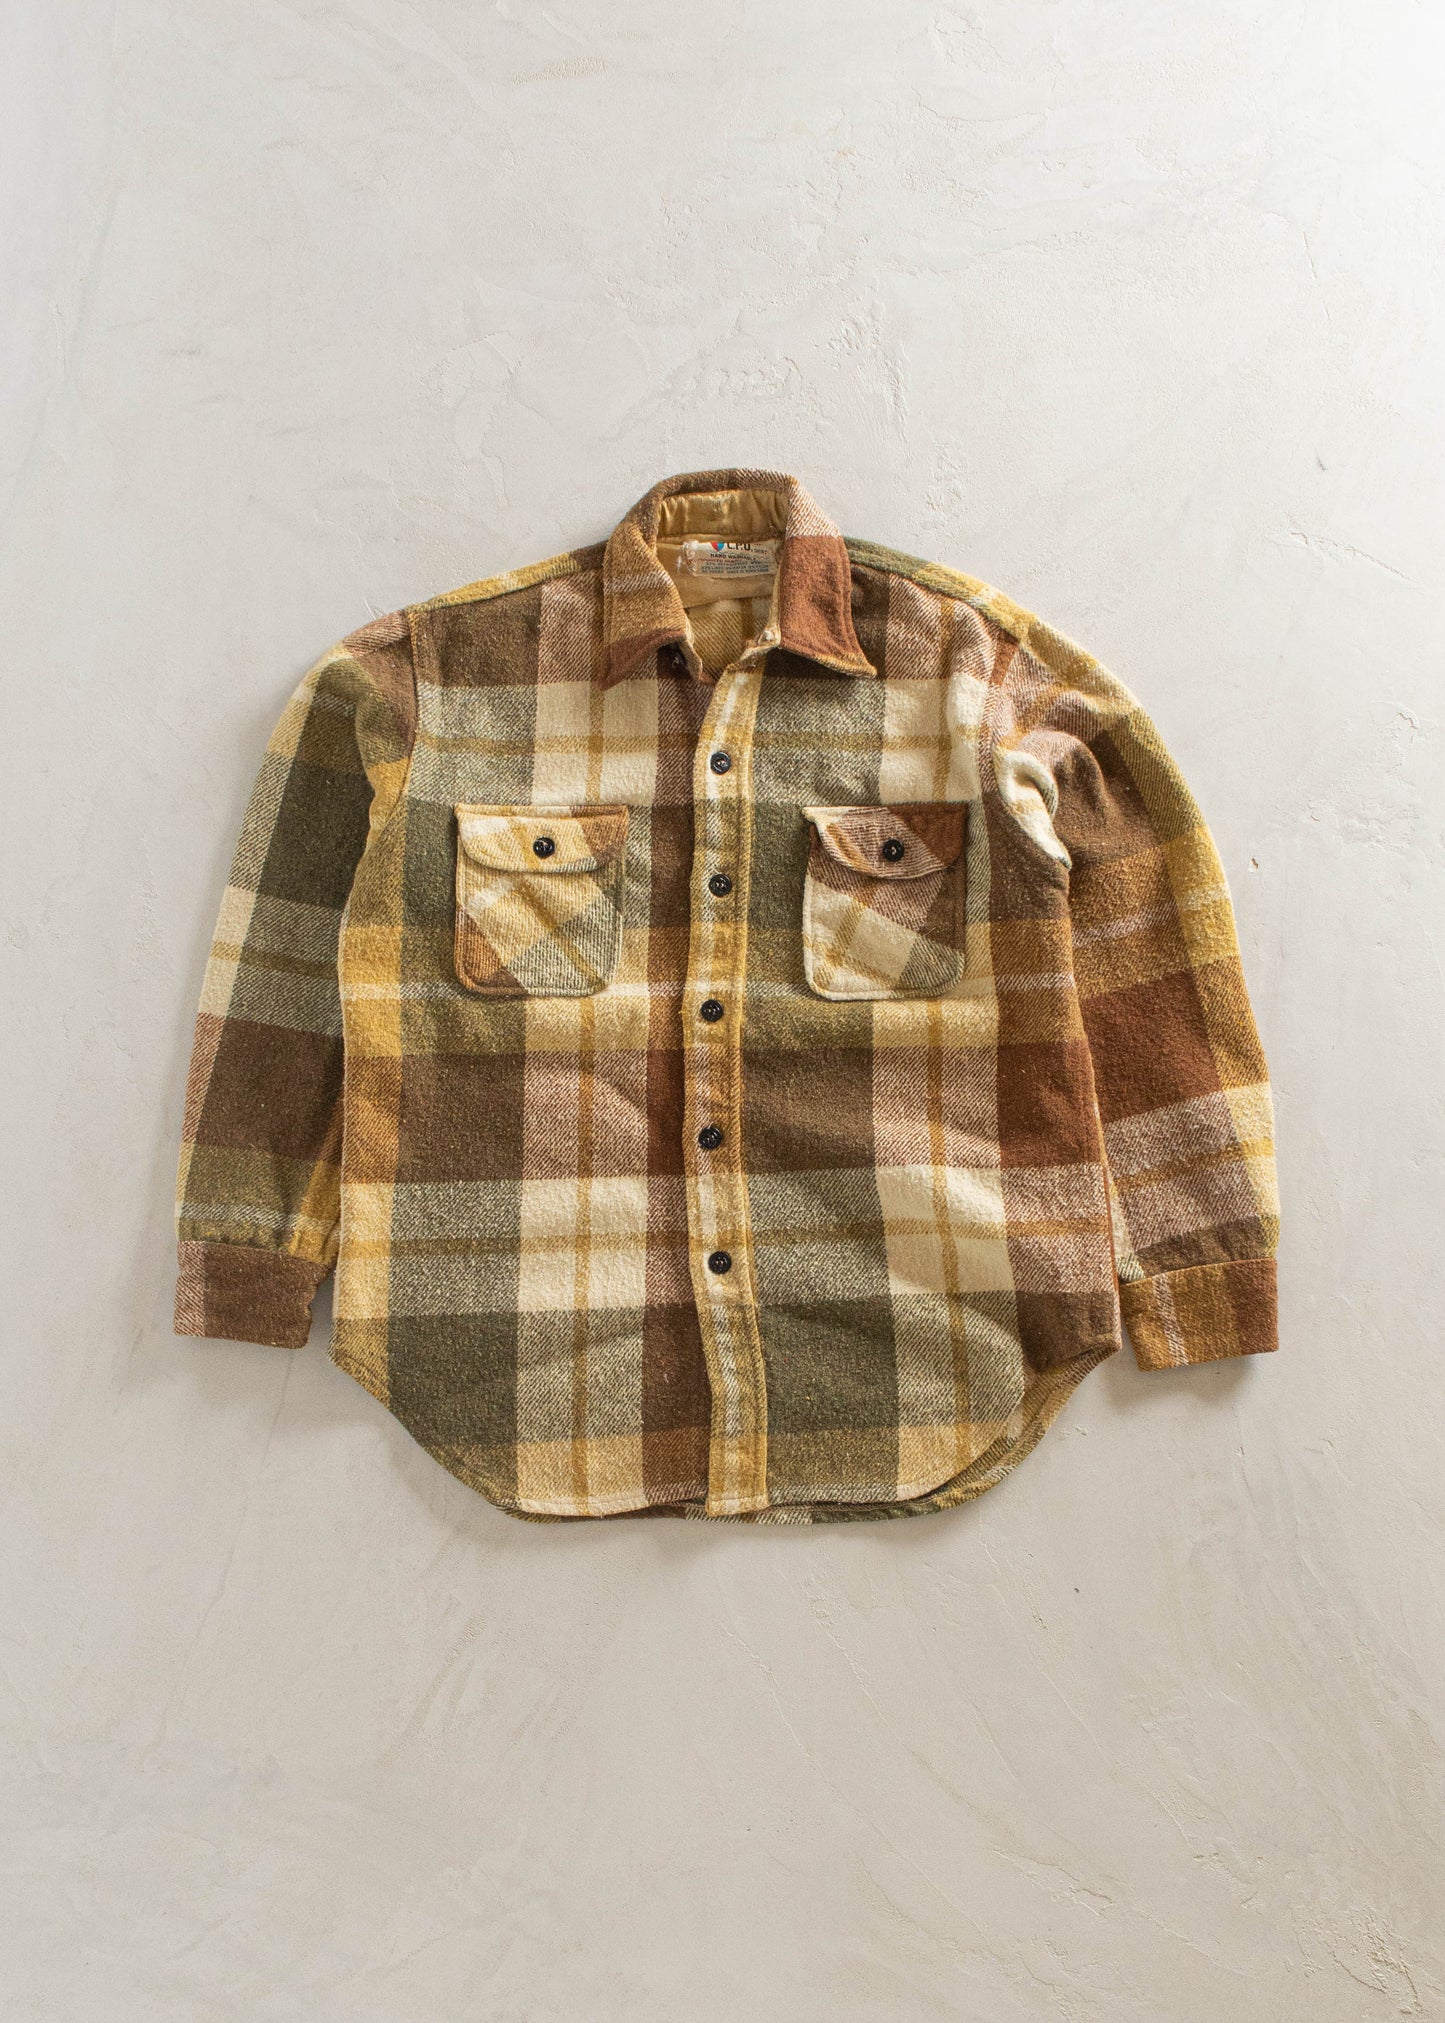 1970s C.P.O Flannel Button Up Shirt Size S/M